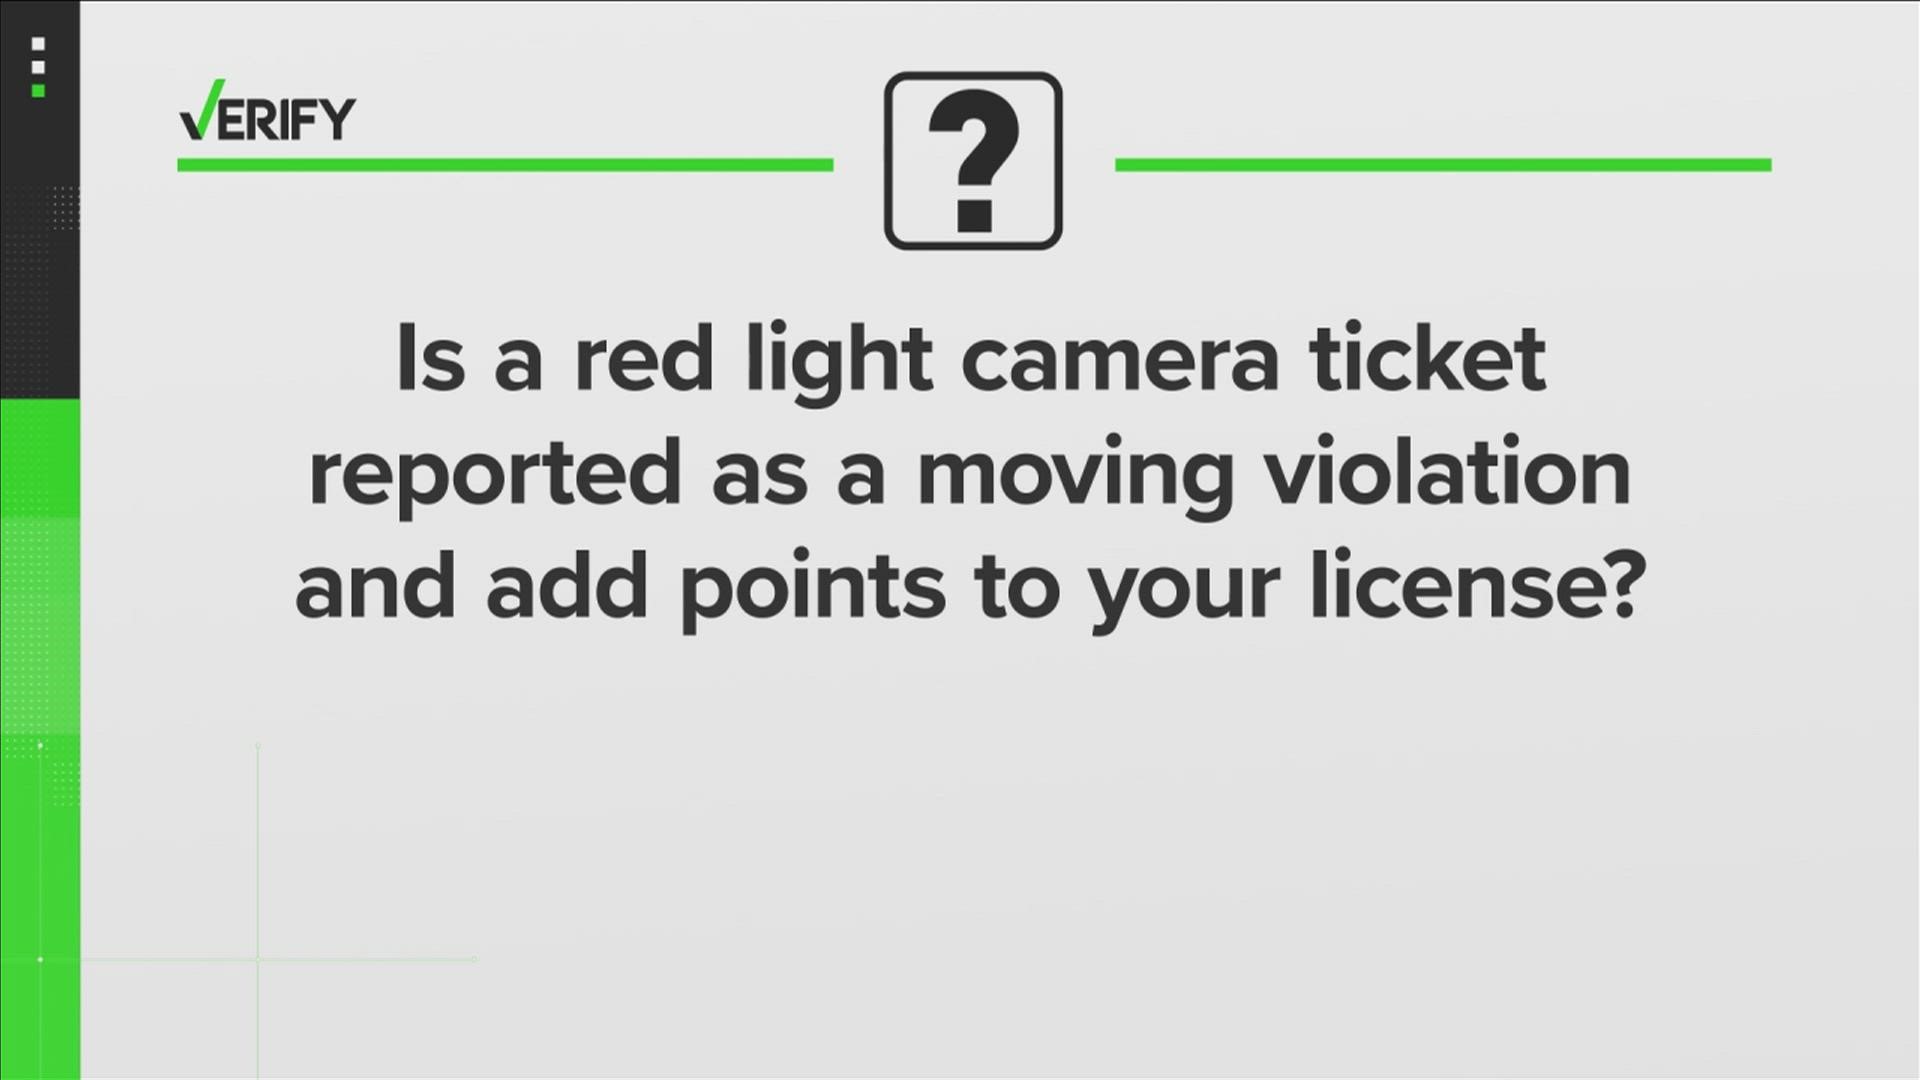 However, attorneys say you are required to pay the fine if an officer pulls you over and physically hands you a red light ticket.